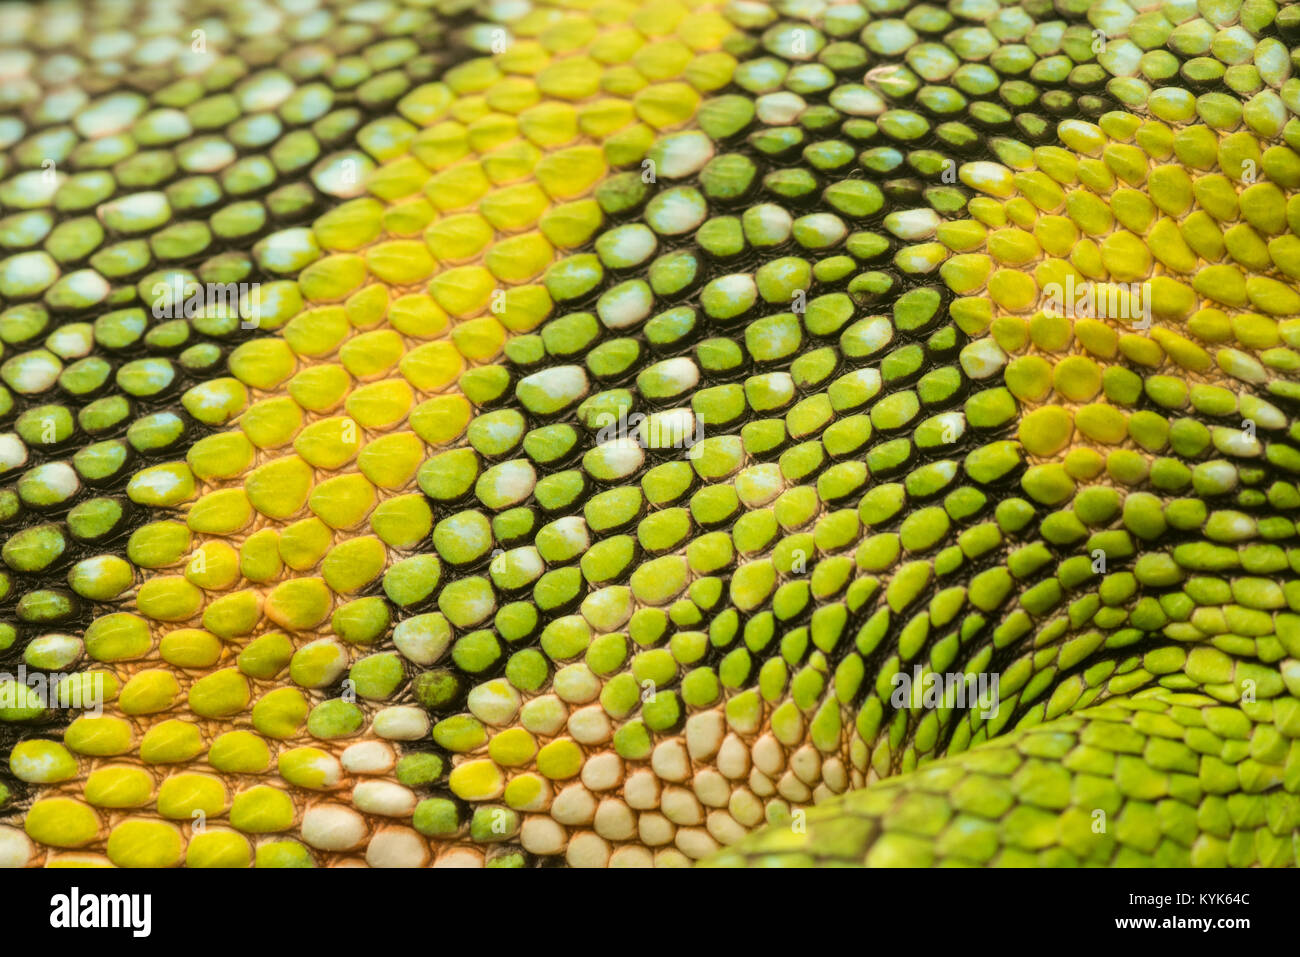 The close up of the scales of Polychris marmoratus from the Amazon basin. Stock Photo